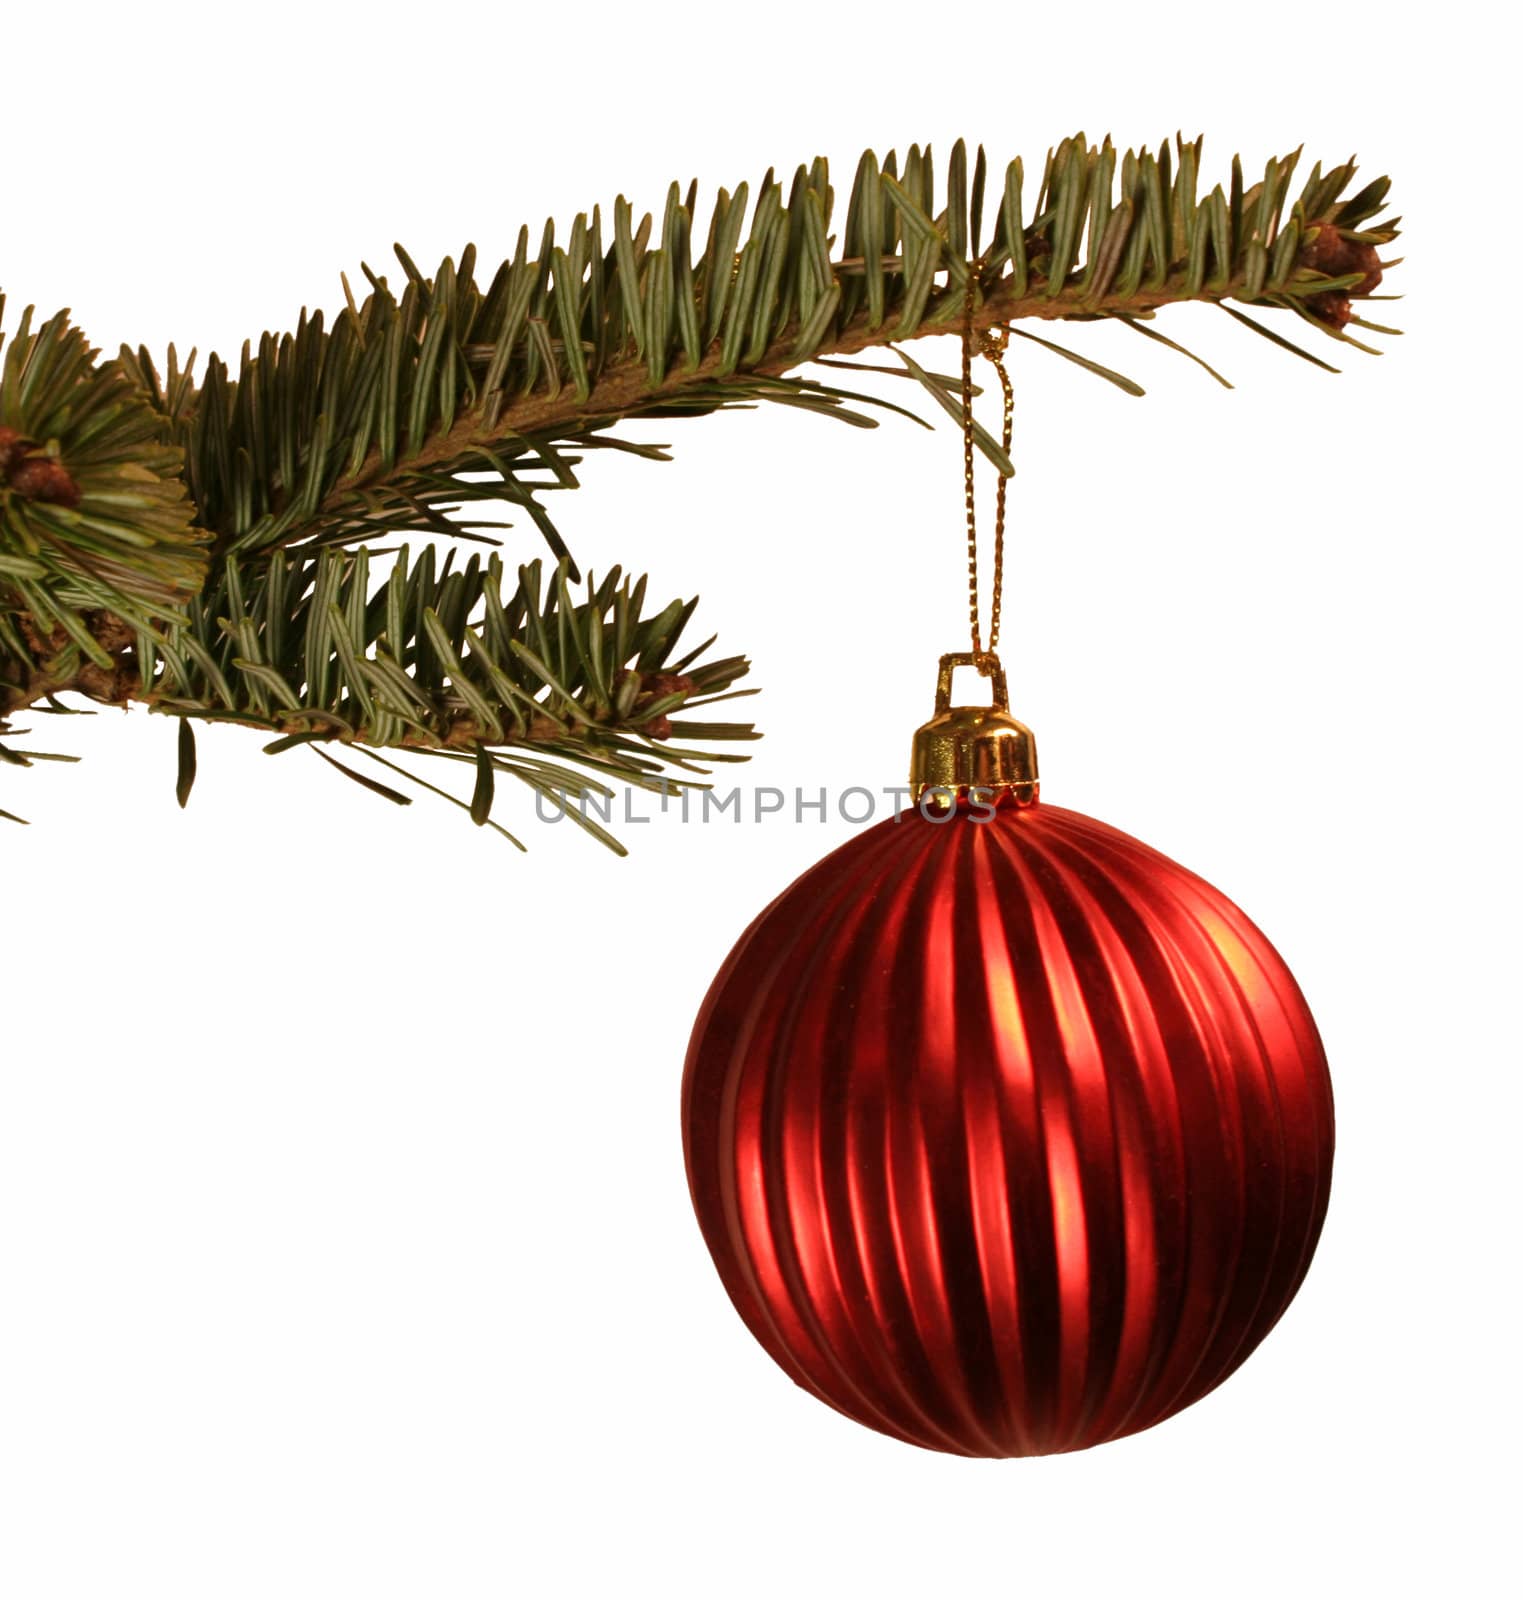 Red Ball Christmas Ornament
 by ca2hill